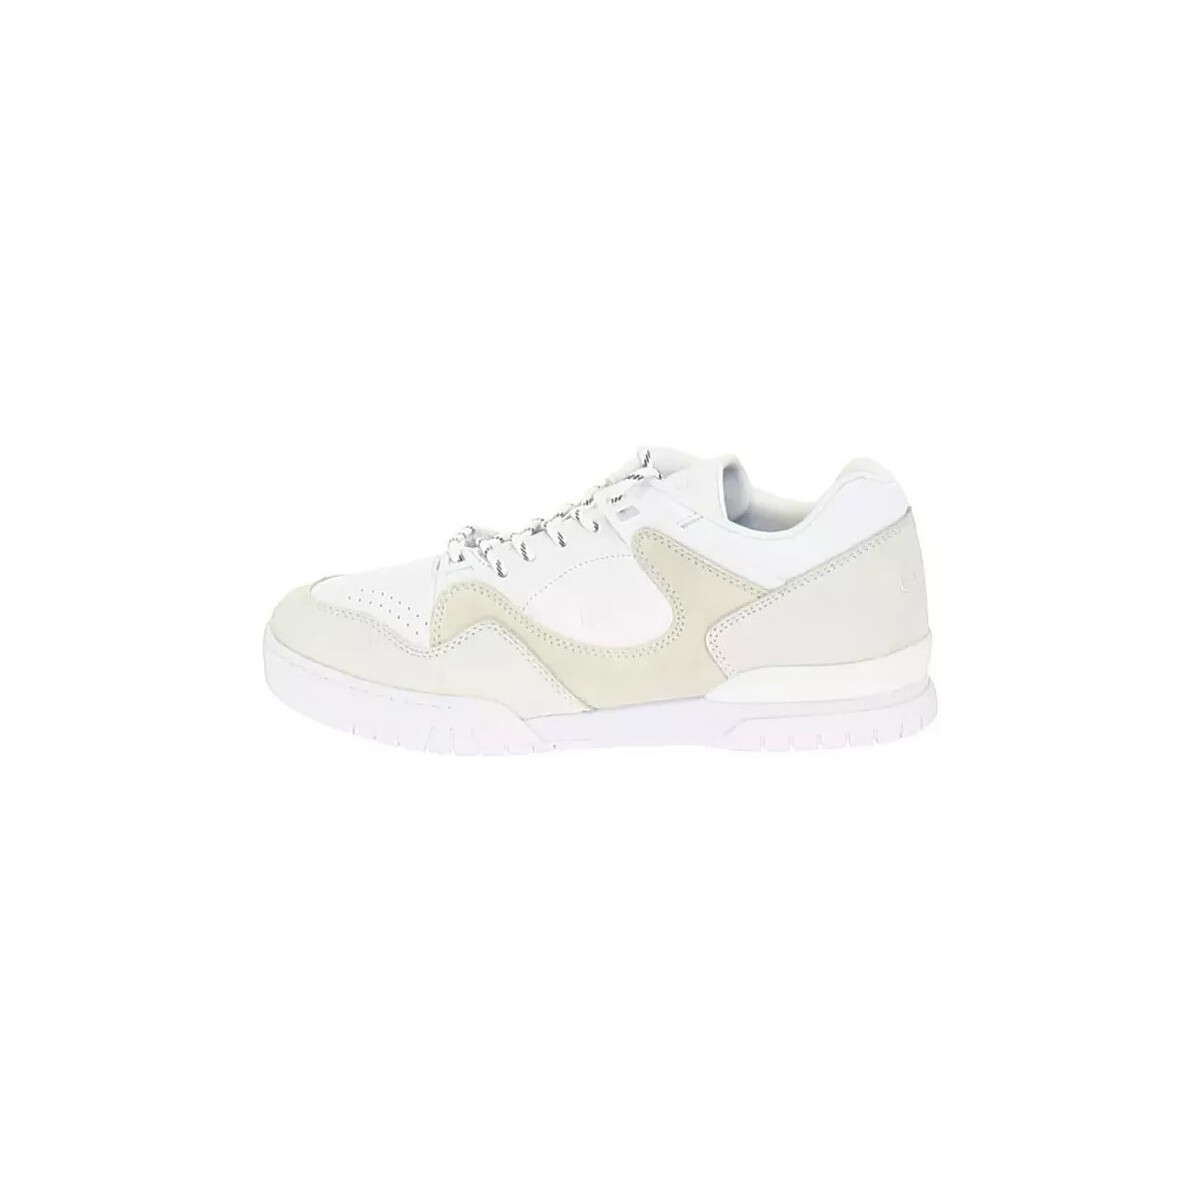 Chaussures Homme Baskets basses Lacoste COURT POINT 119 1G SMA Blanc